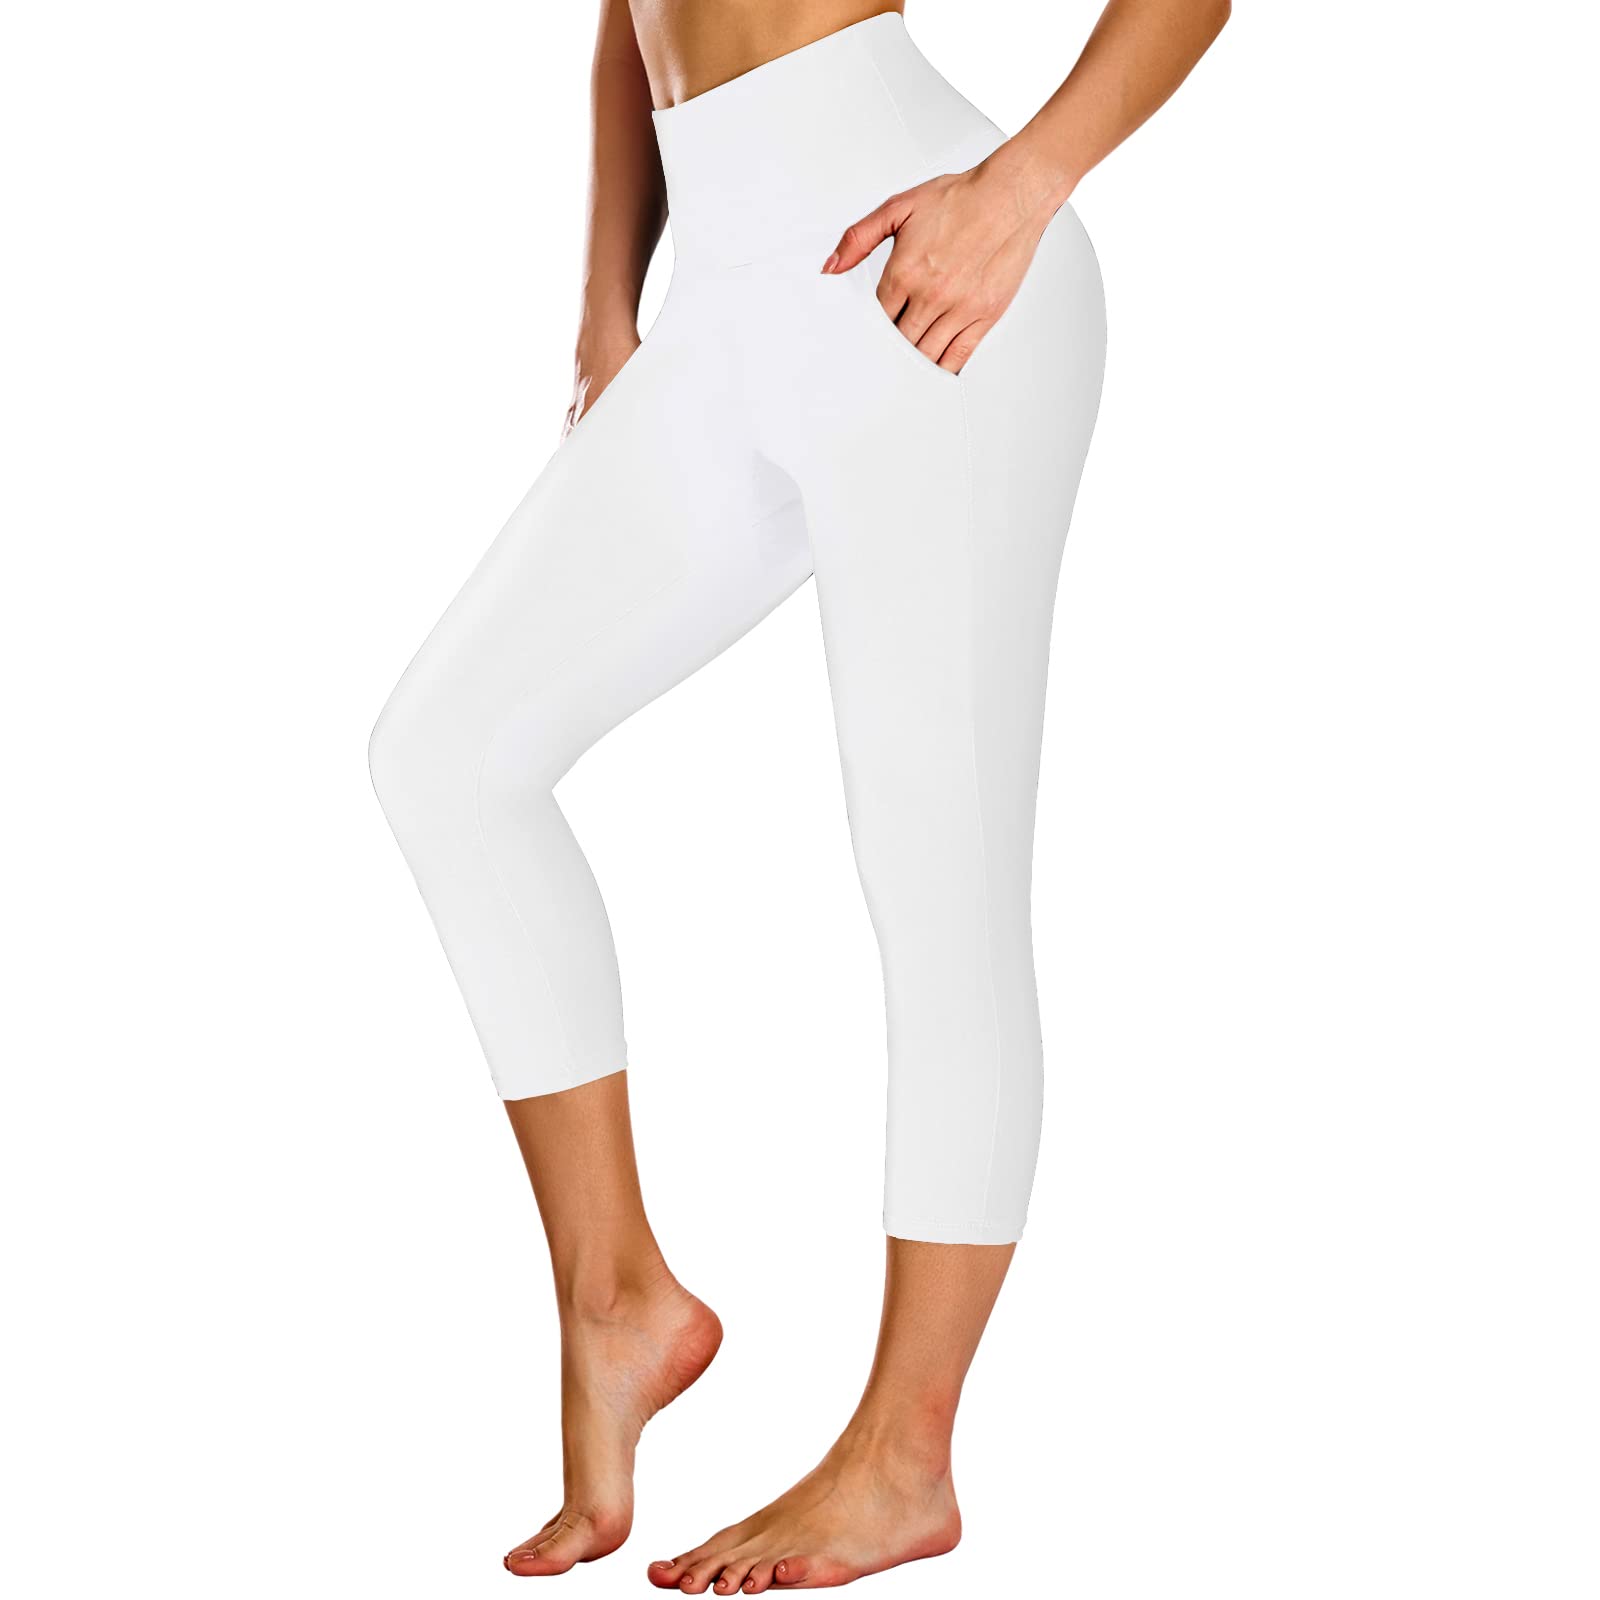 NEW YOUNG Capri Leggings with Pockets for Women High Waisted